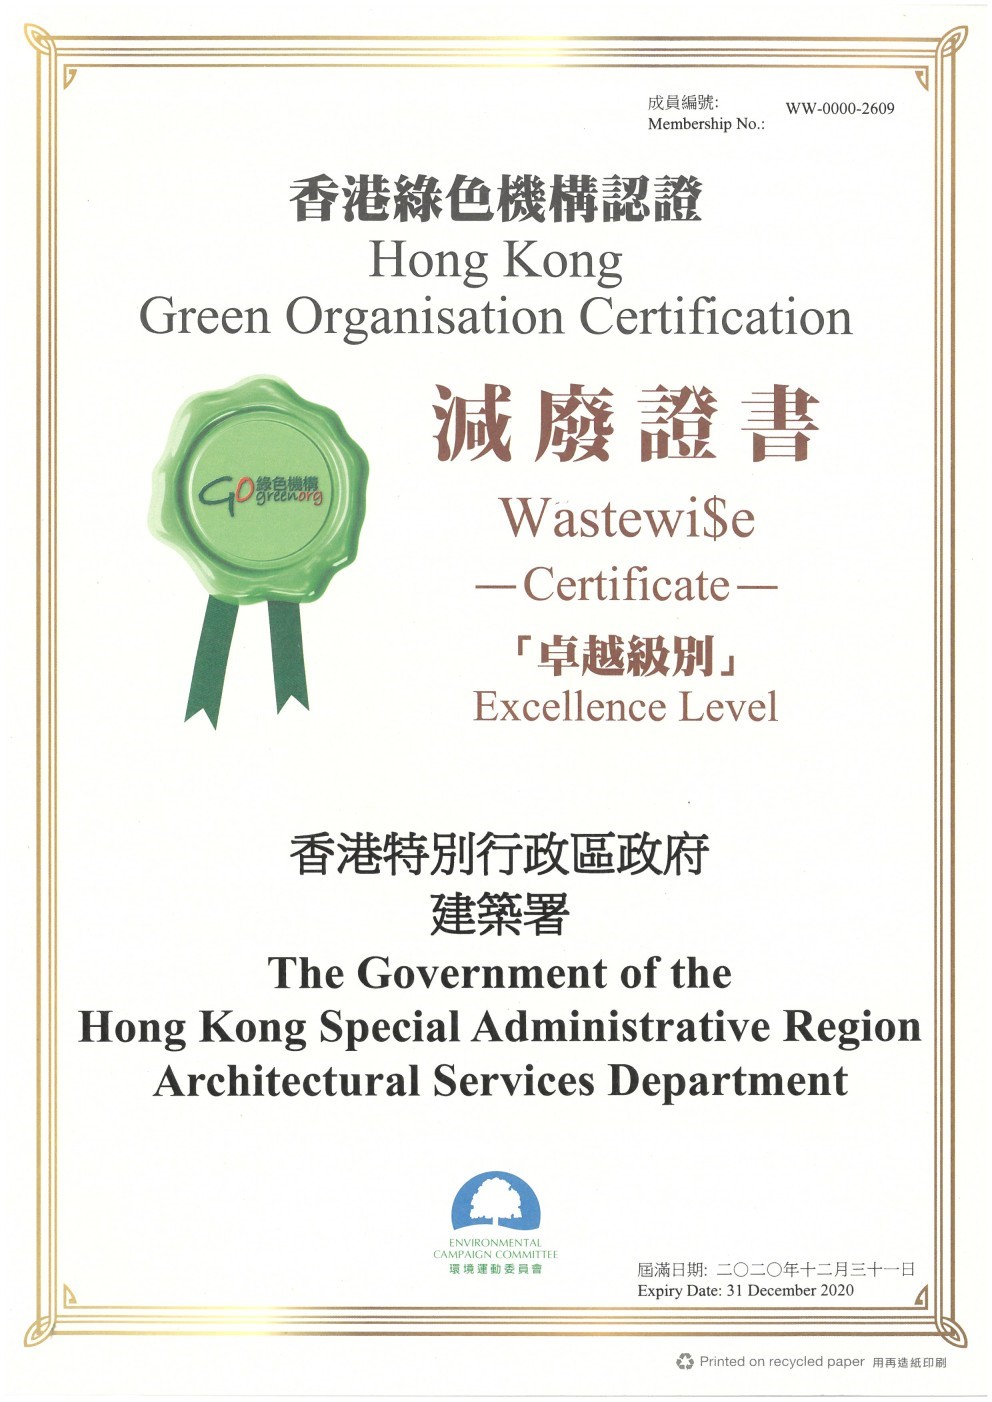 'Class of Excellence' Wastewi$e Certificate'